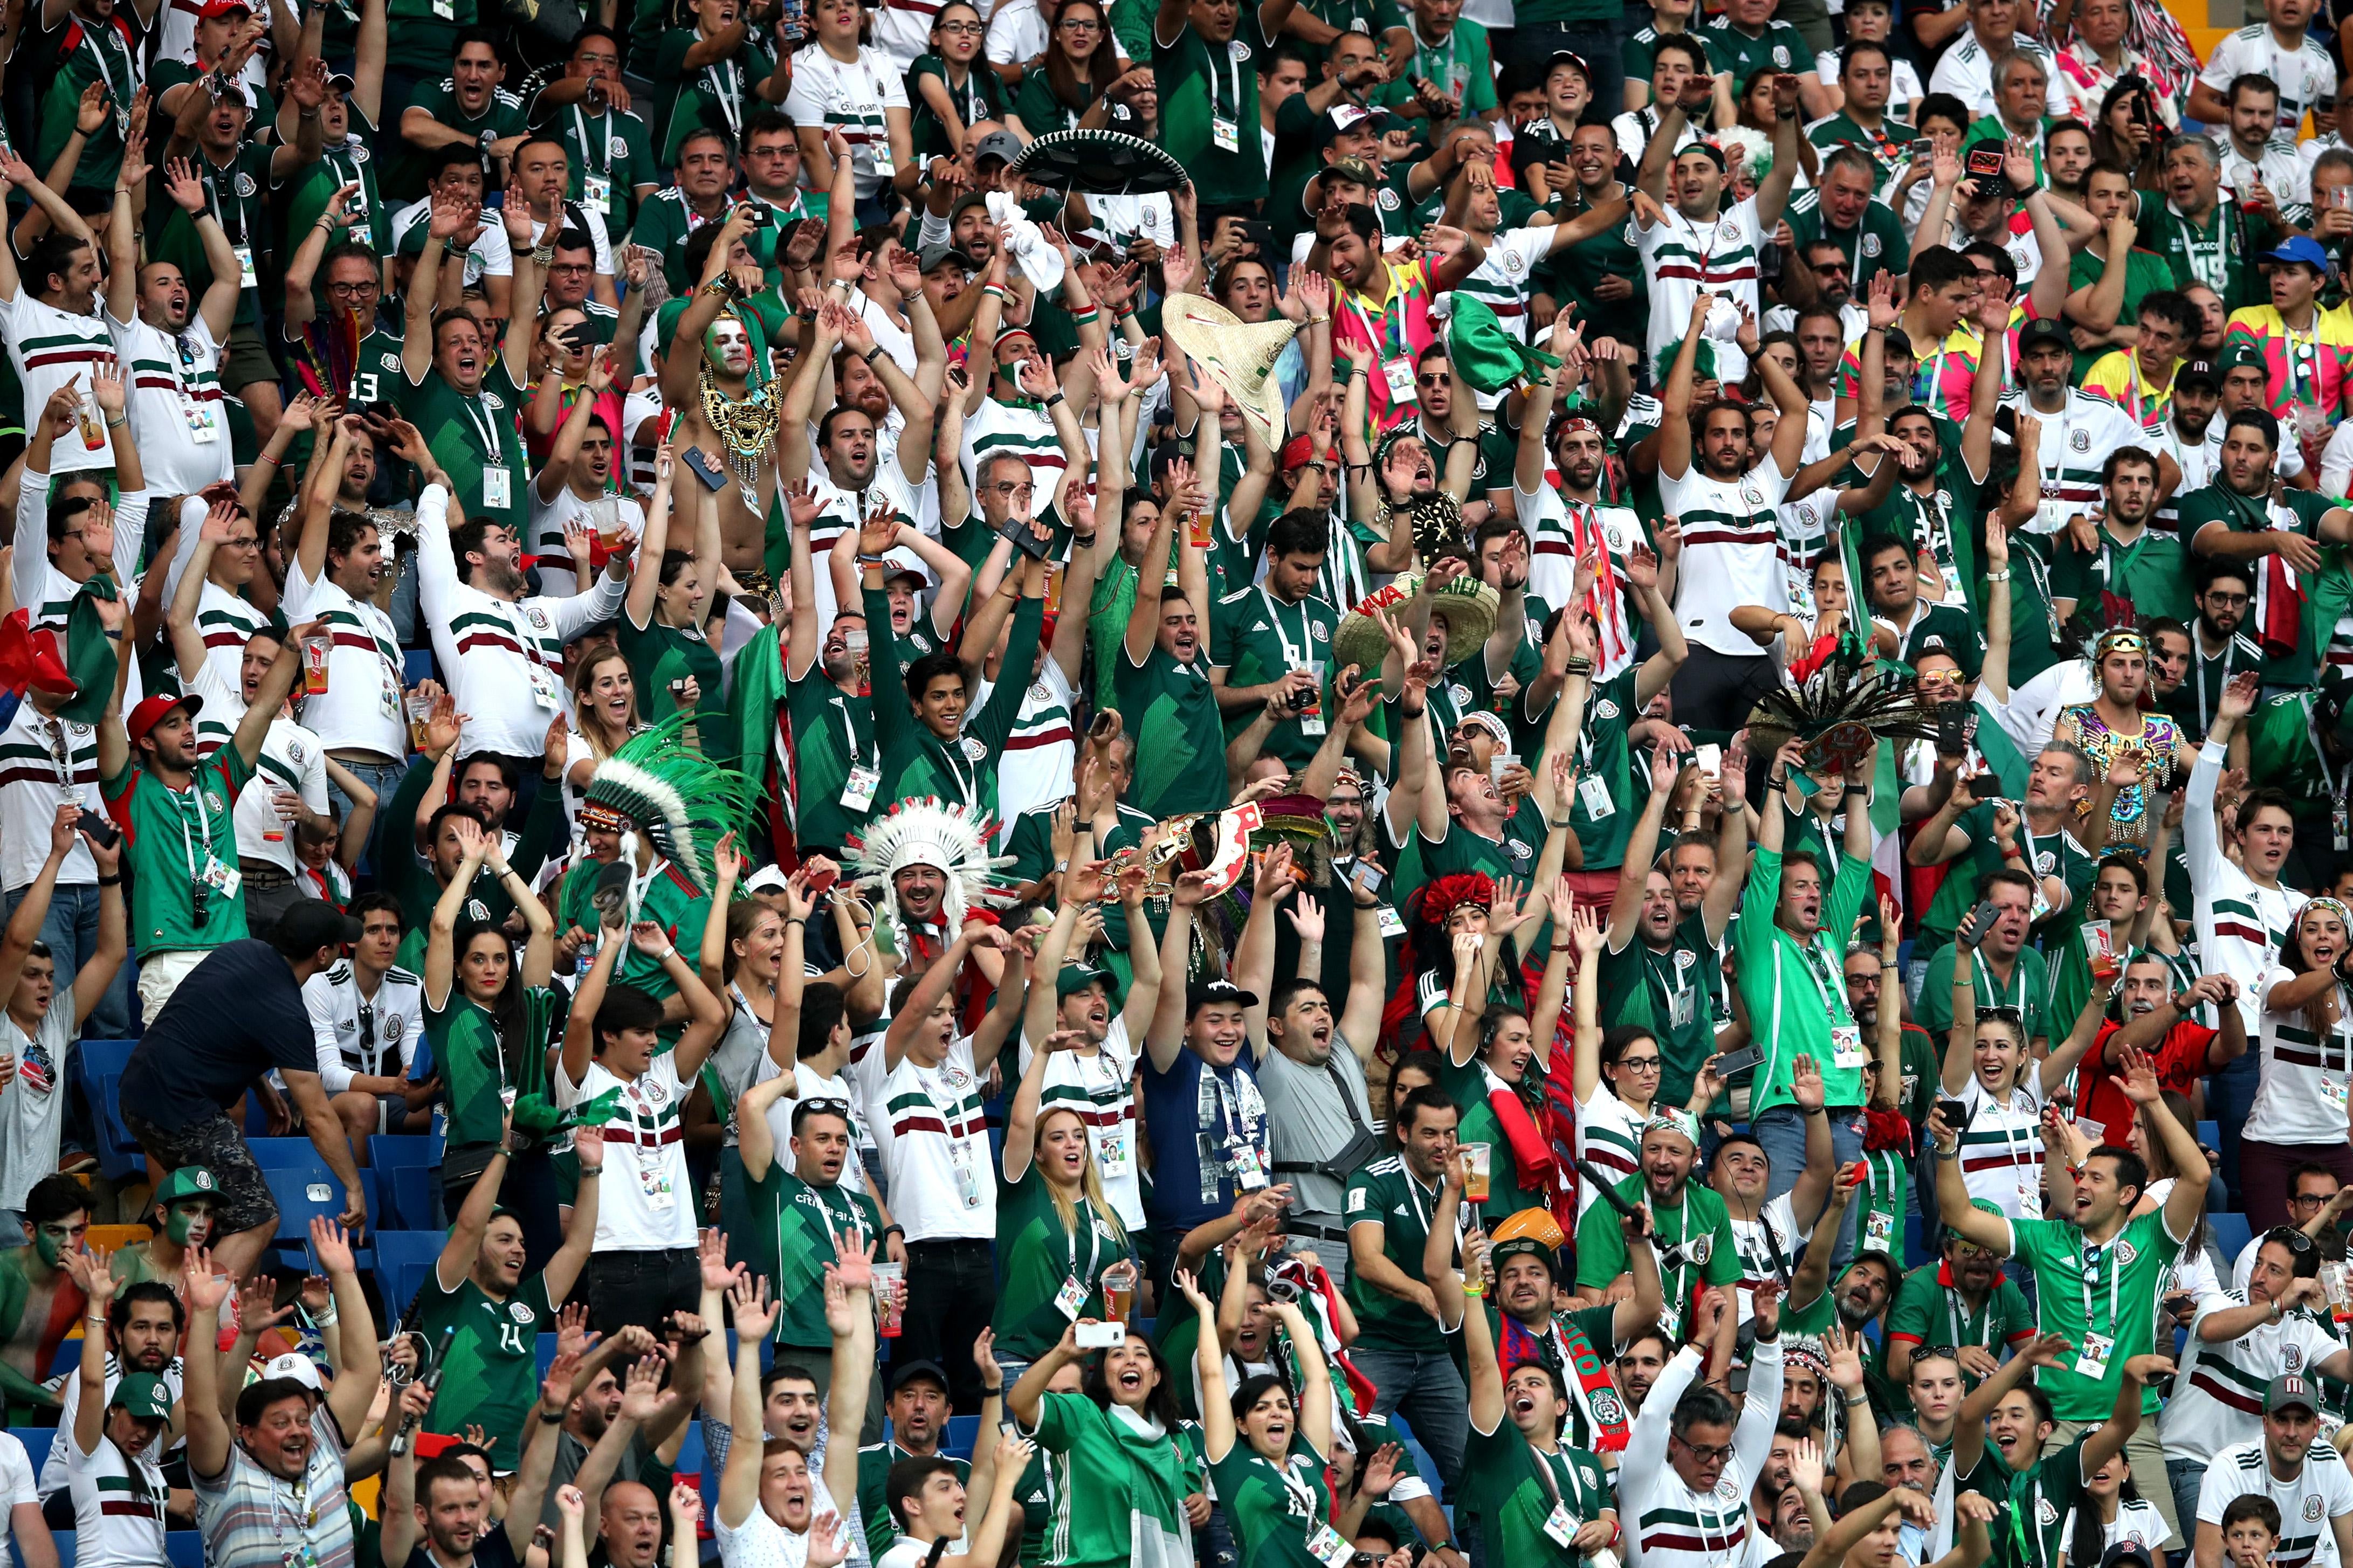 ROSTOV-ON-DON, RUSSIA - JUNE 23:  Mexico fans create a Mexican wave during the 2018 FIFA World Cup Russia group F match between Korea Republic and Mexico at Rostov Arena on June 23, 2018 in Rostov-on-Don, Russia.  (Photo by Clive Brunskill/Getty Images)